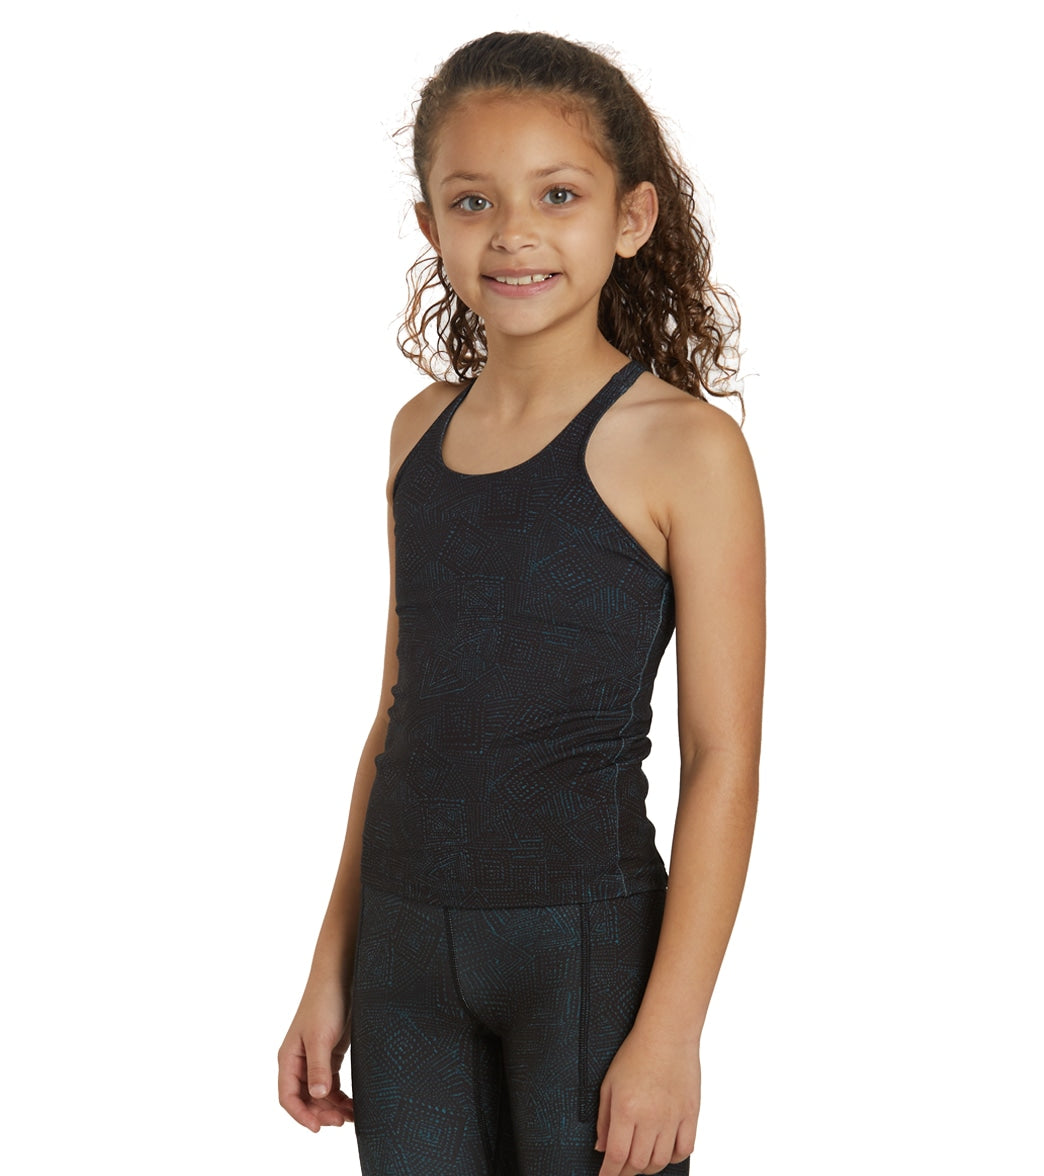 Everyday Yoga Girl's Elevated Tribe Support Tank at YogaOutlet.com –